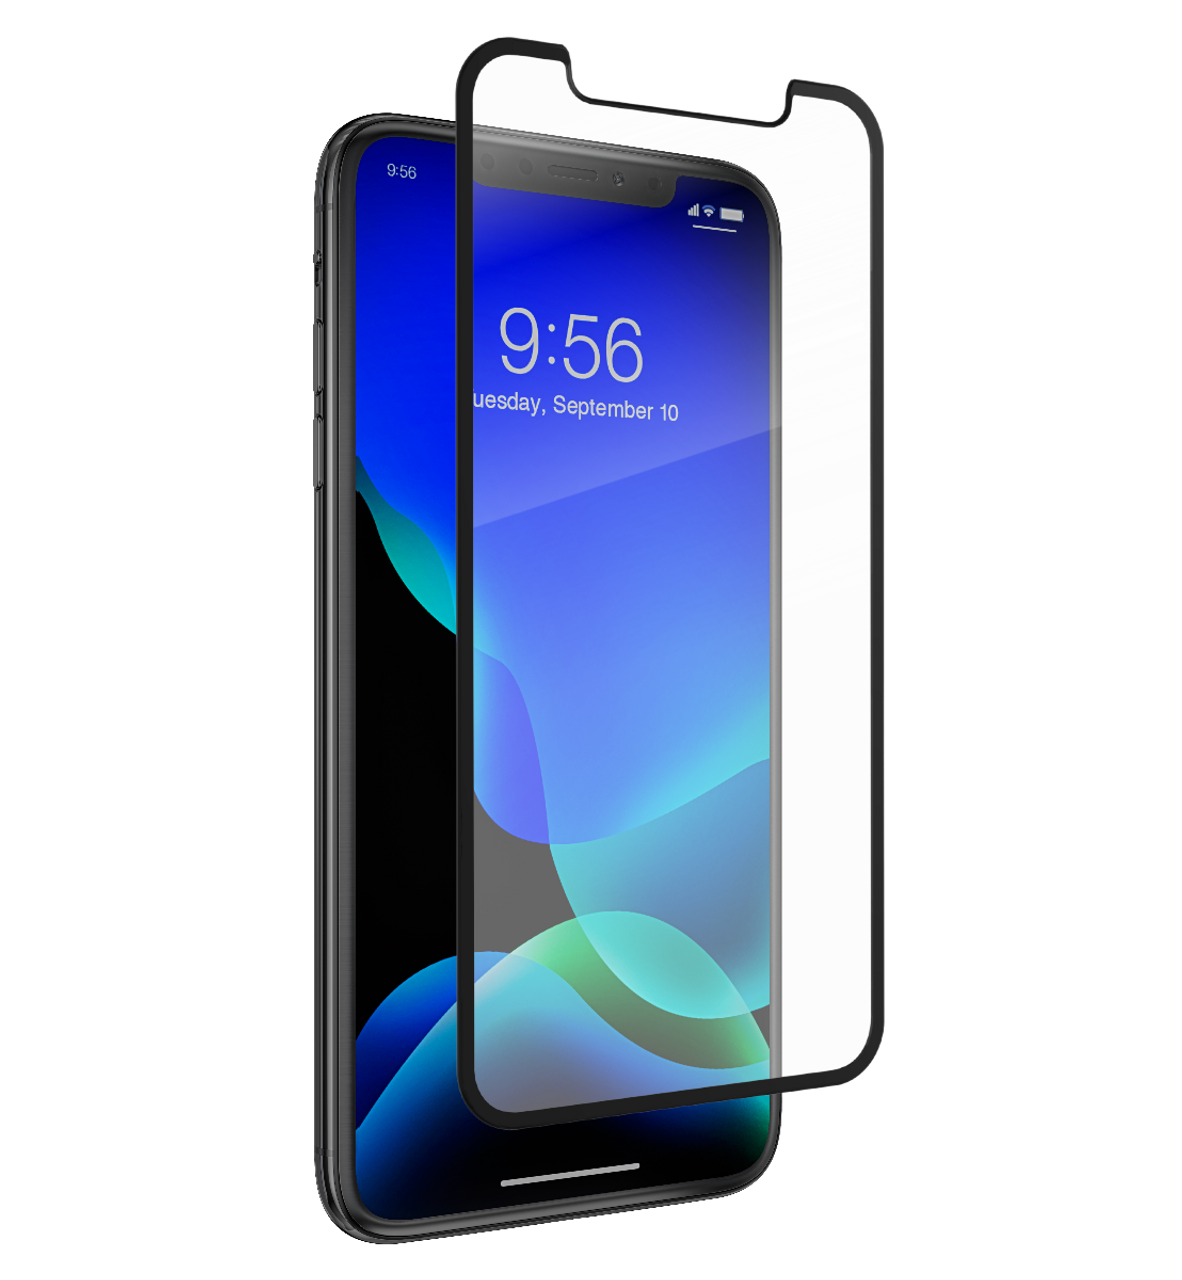 Glass Elite Privacy for the Apple iPhone 11 Pro